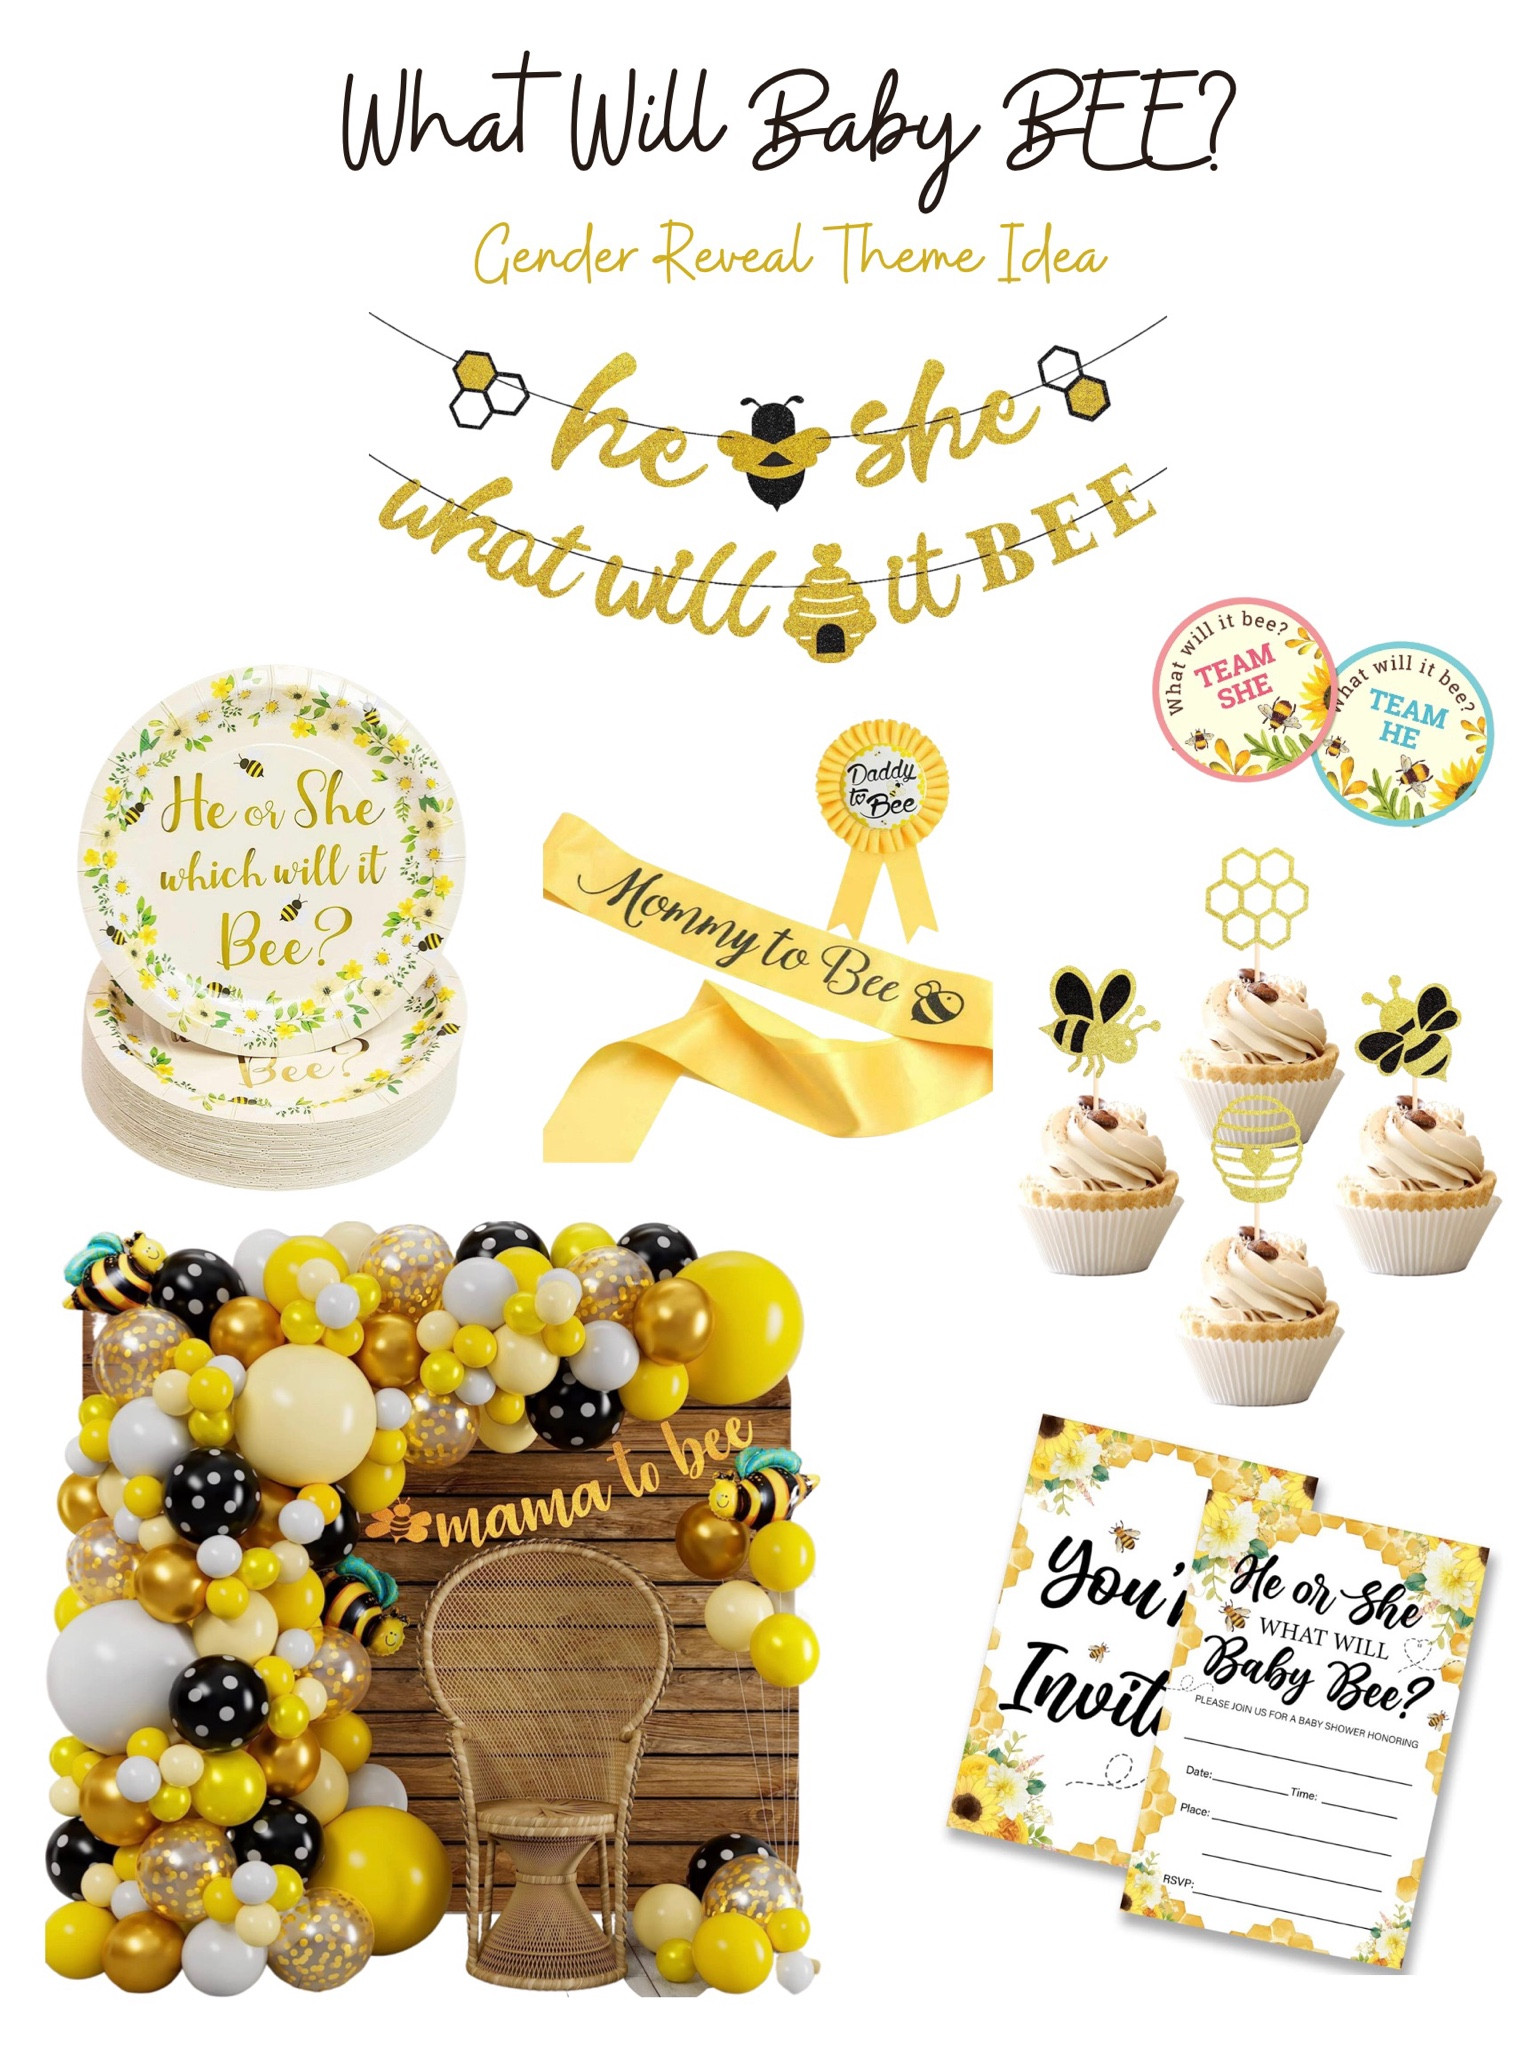 Birthday Galore What Will The Little Honey Bee? Gender Reveal Party Supplies Set Plates Napkins Cups Tableware Kit for 16